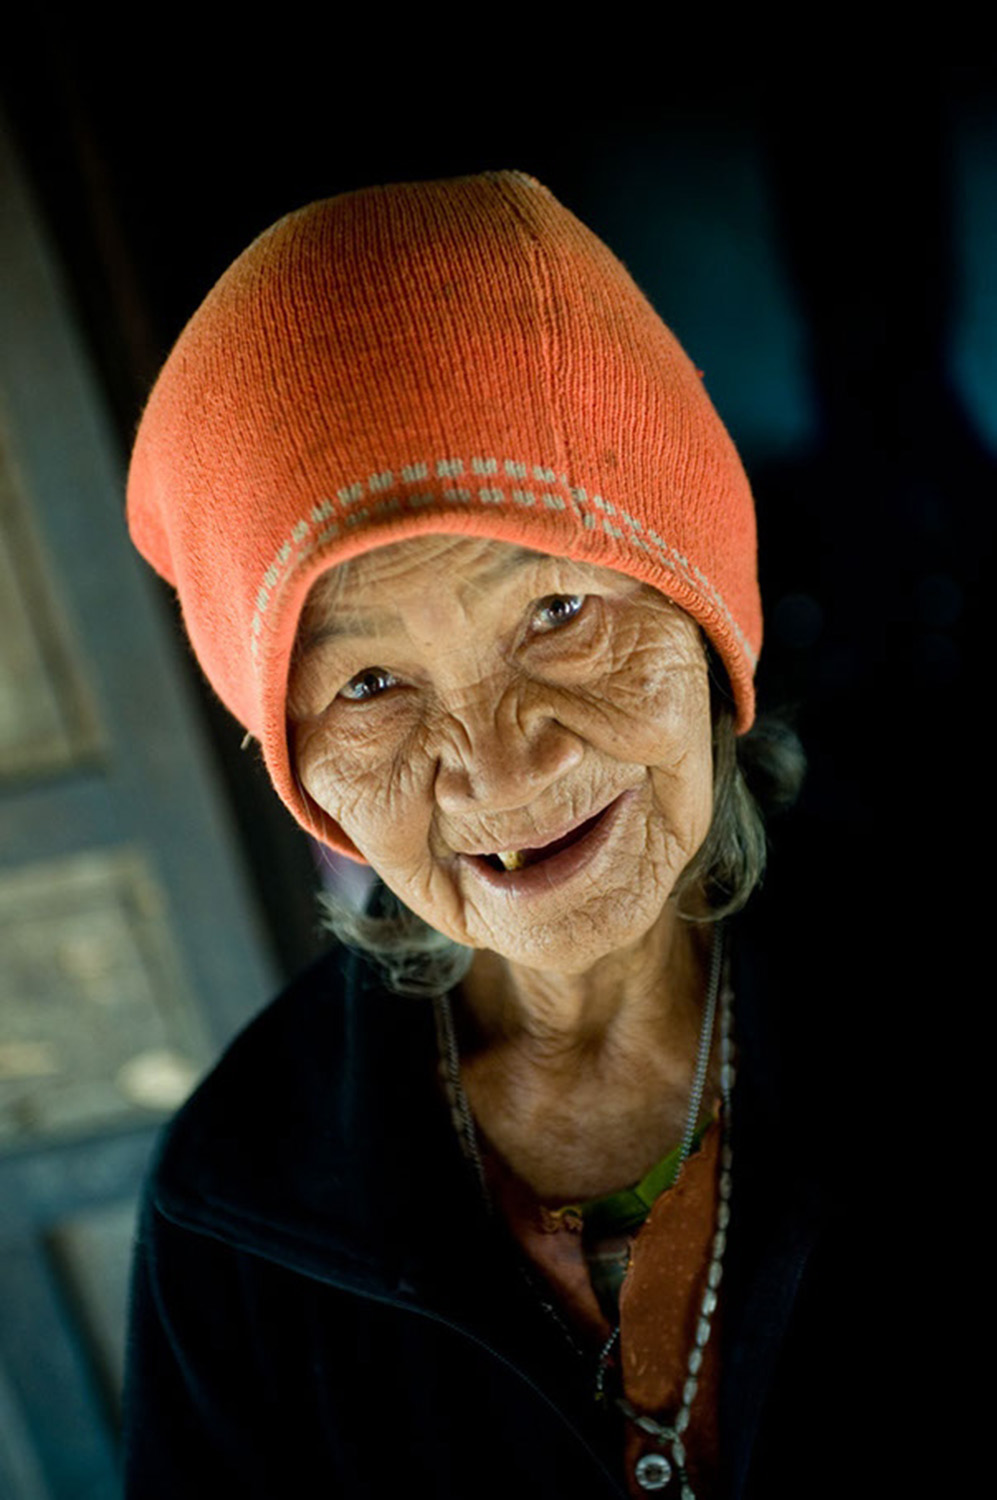 image of AARONTAIT COPYRIGHTED 2014 297I TRAVEL PHOTOGRAPHER ASIA REPORTAGE EDITORIAL STORY HUMANS LIFE EARTH TRAVELER EXPLORE CULTURE PEOPLE COUNTRY NATIONALITY DOCUMENTARY VIETNAM ELDER OLD LADY RURAL HAPPY 